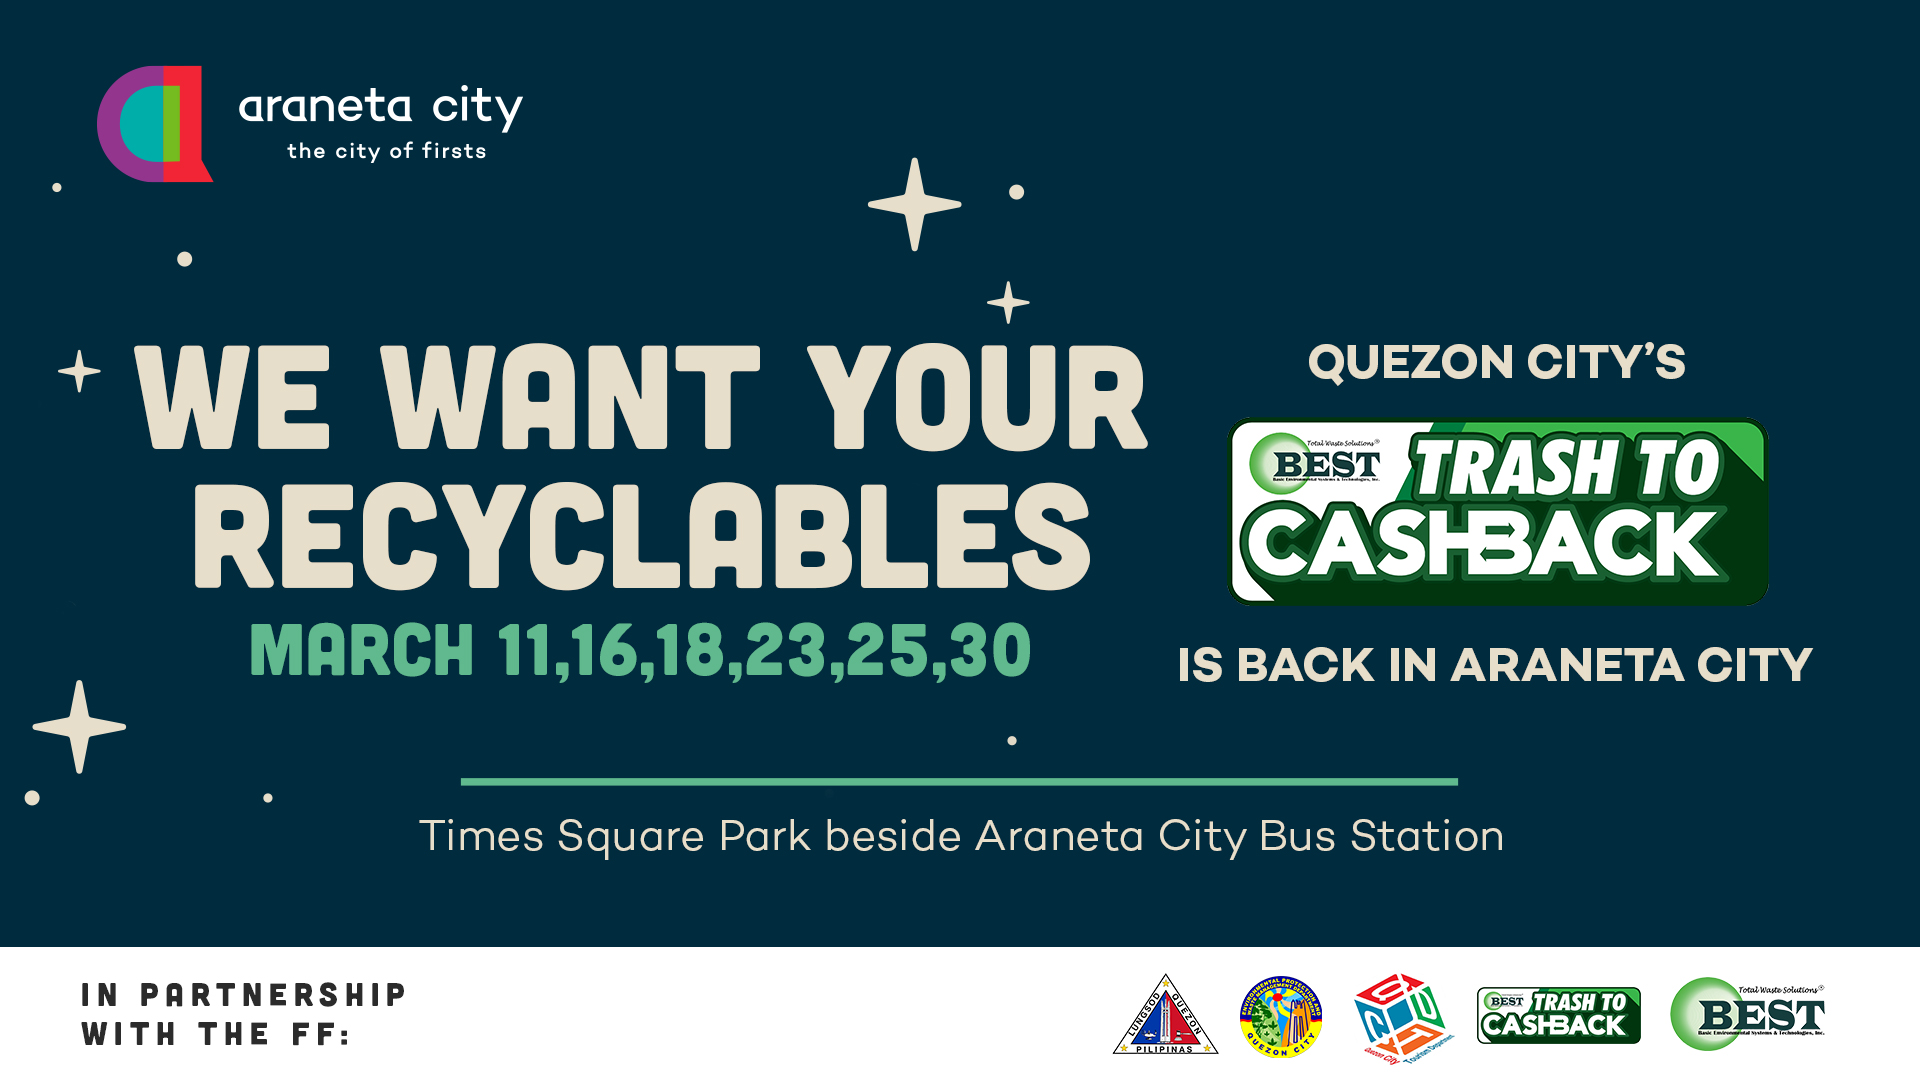 What to trade in Araneta City’s “We Want Your Recyclables”?